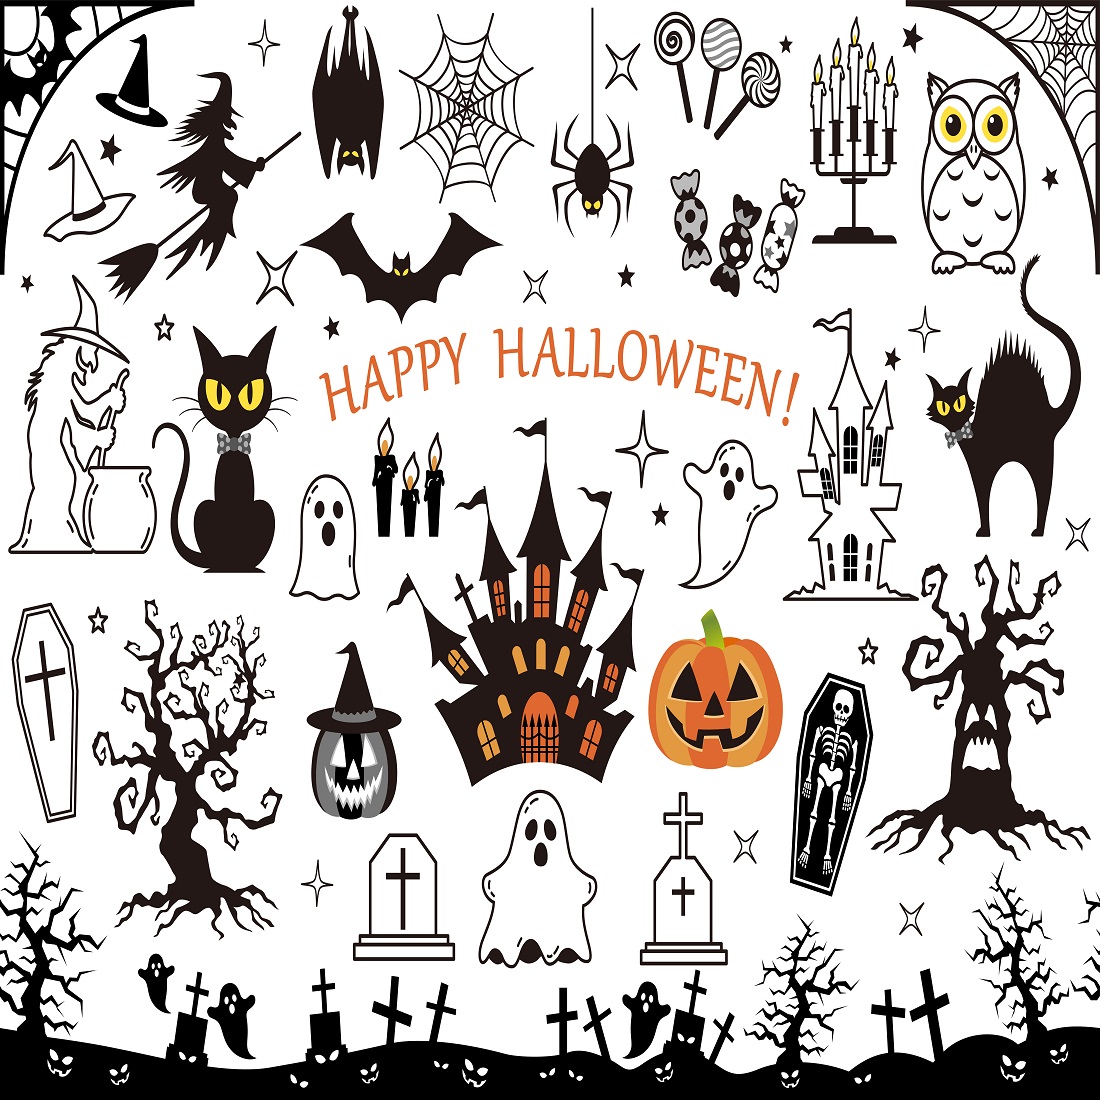 Happy Halloween vector design element set isolated white background preview image.